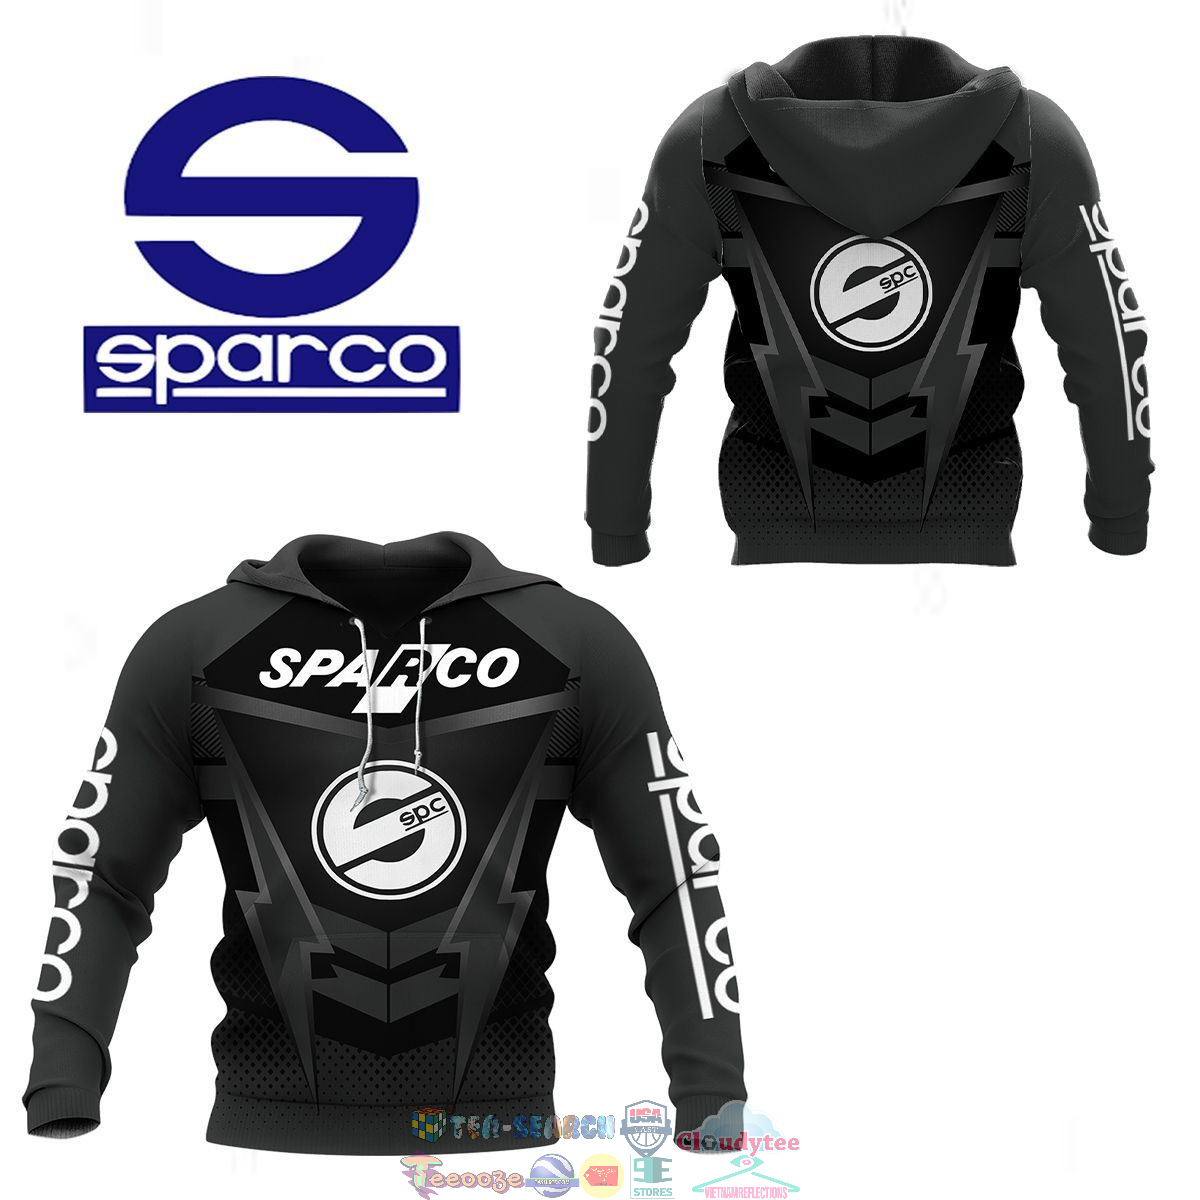 Sparco ver 16 3D hoodie and t-shirt